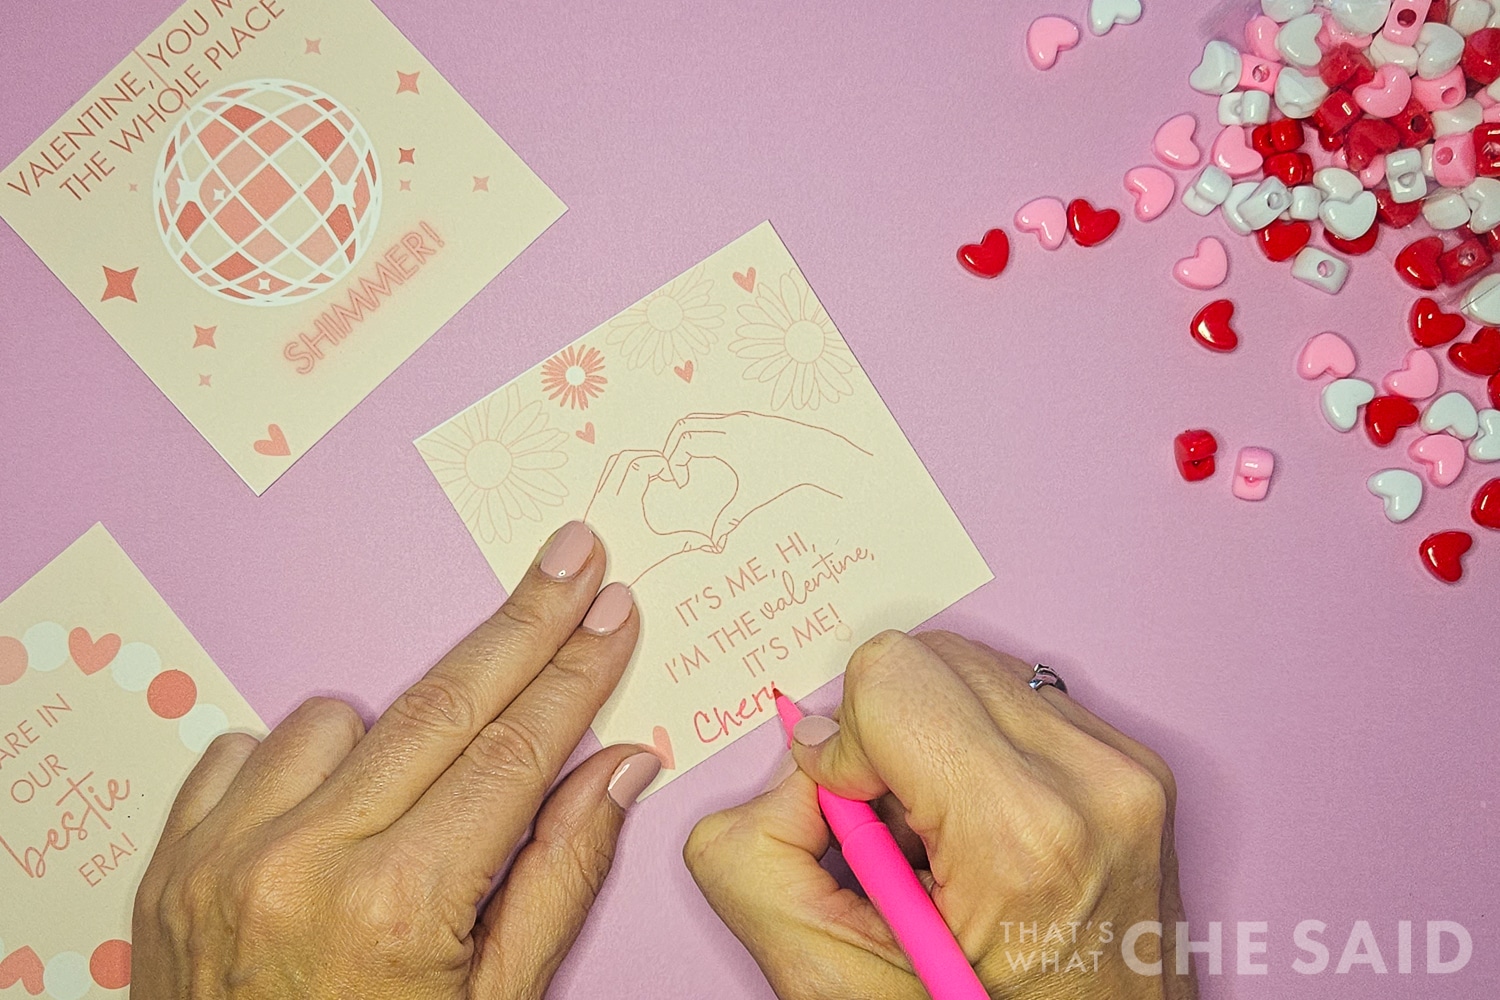 signing name on valentine cards with flair pen